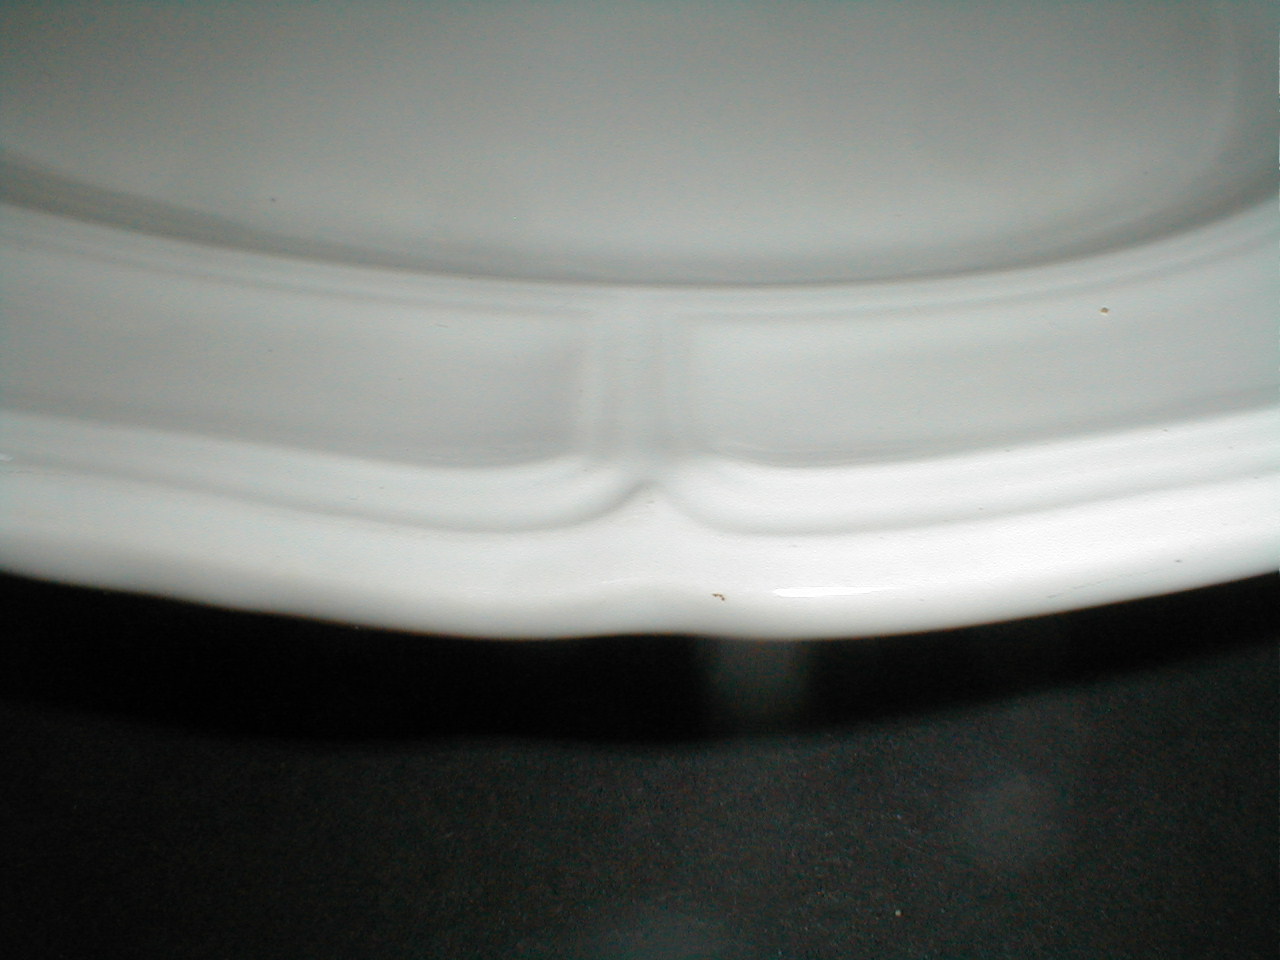 white ironstone unmarked oval platter embossed rim divided sections 15.25 by 11.25 mystery 031.JPG